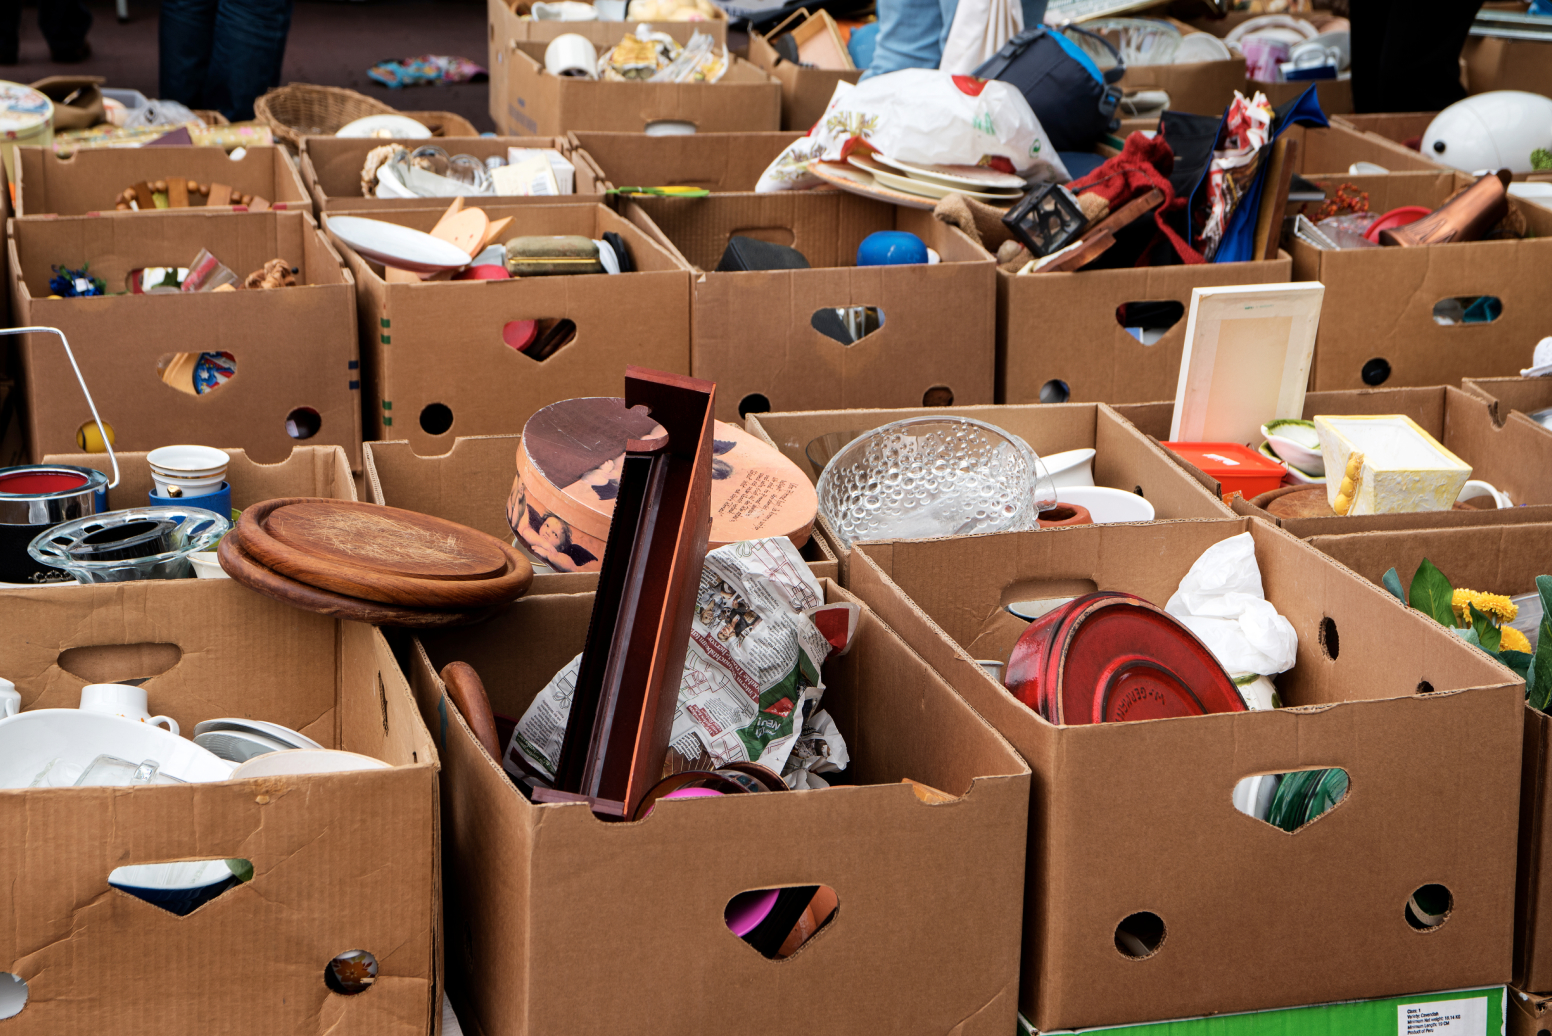 Boxes are packed for an estate sale. While you can hold a DIY estate sale, such an event requires meticulous planning so you can get maximum returns.